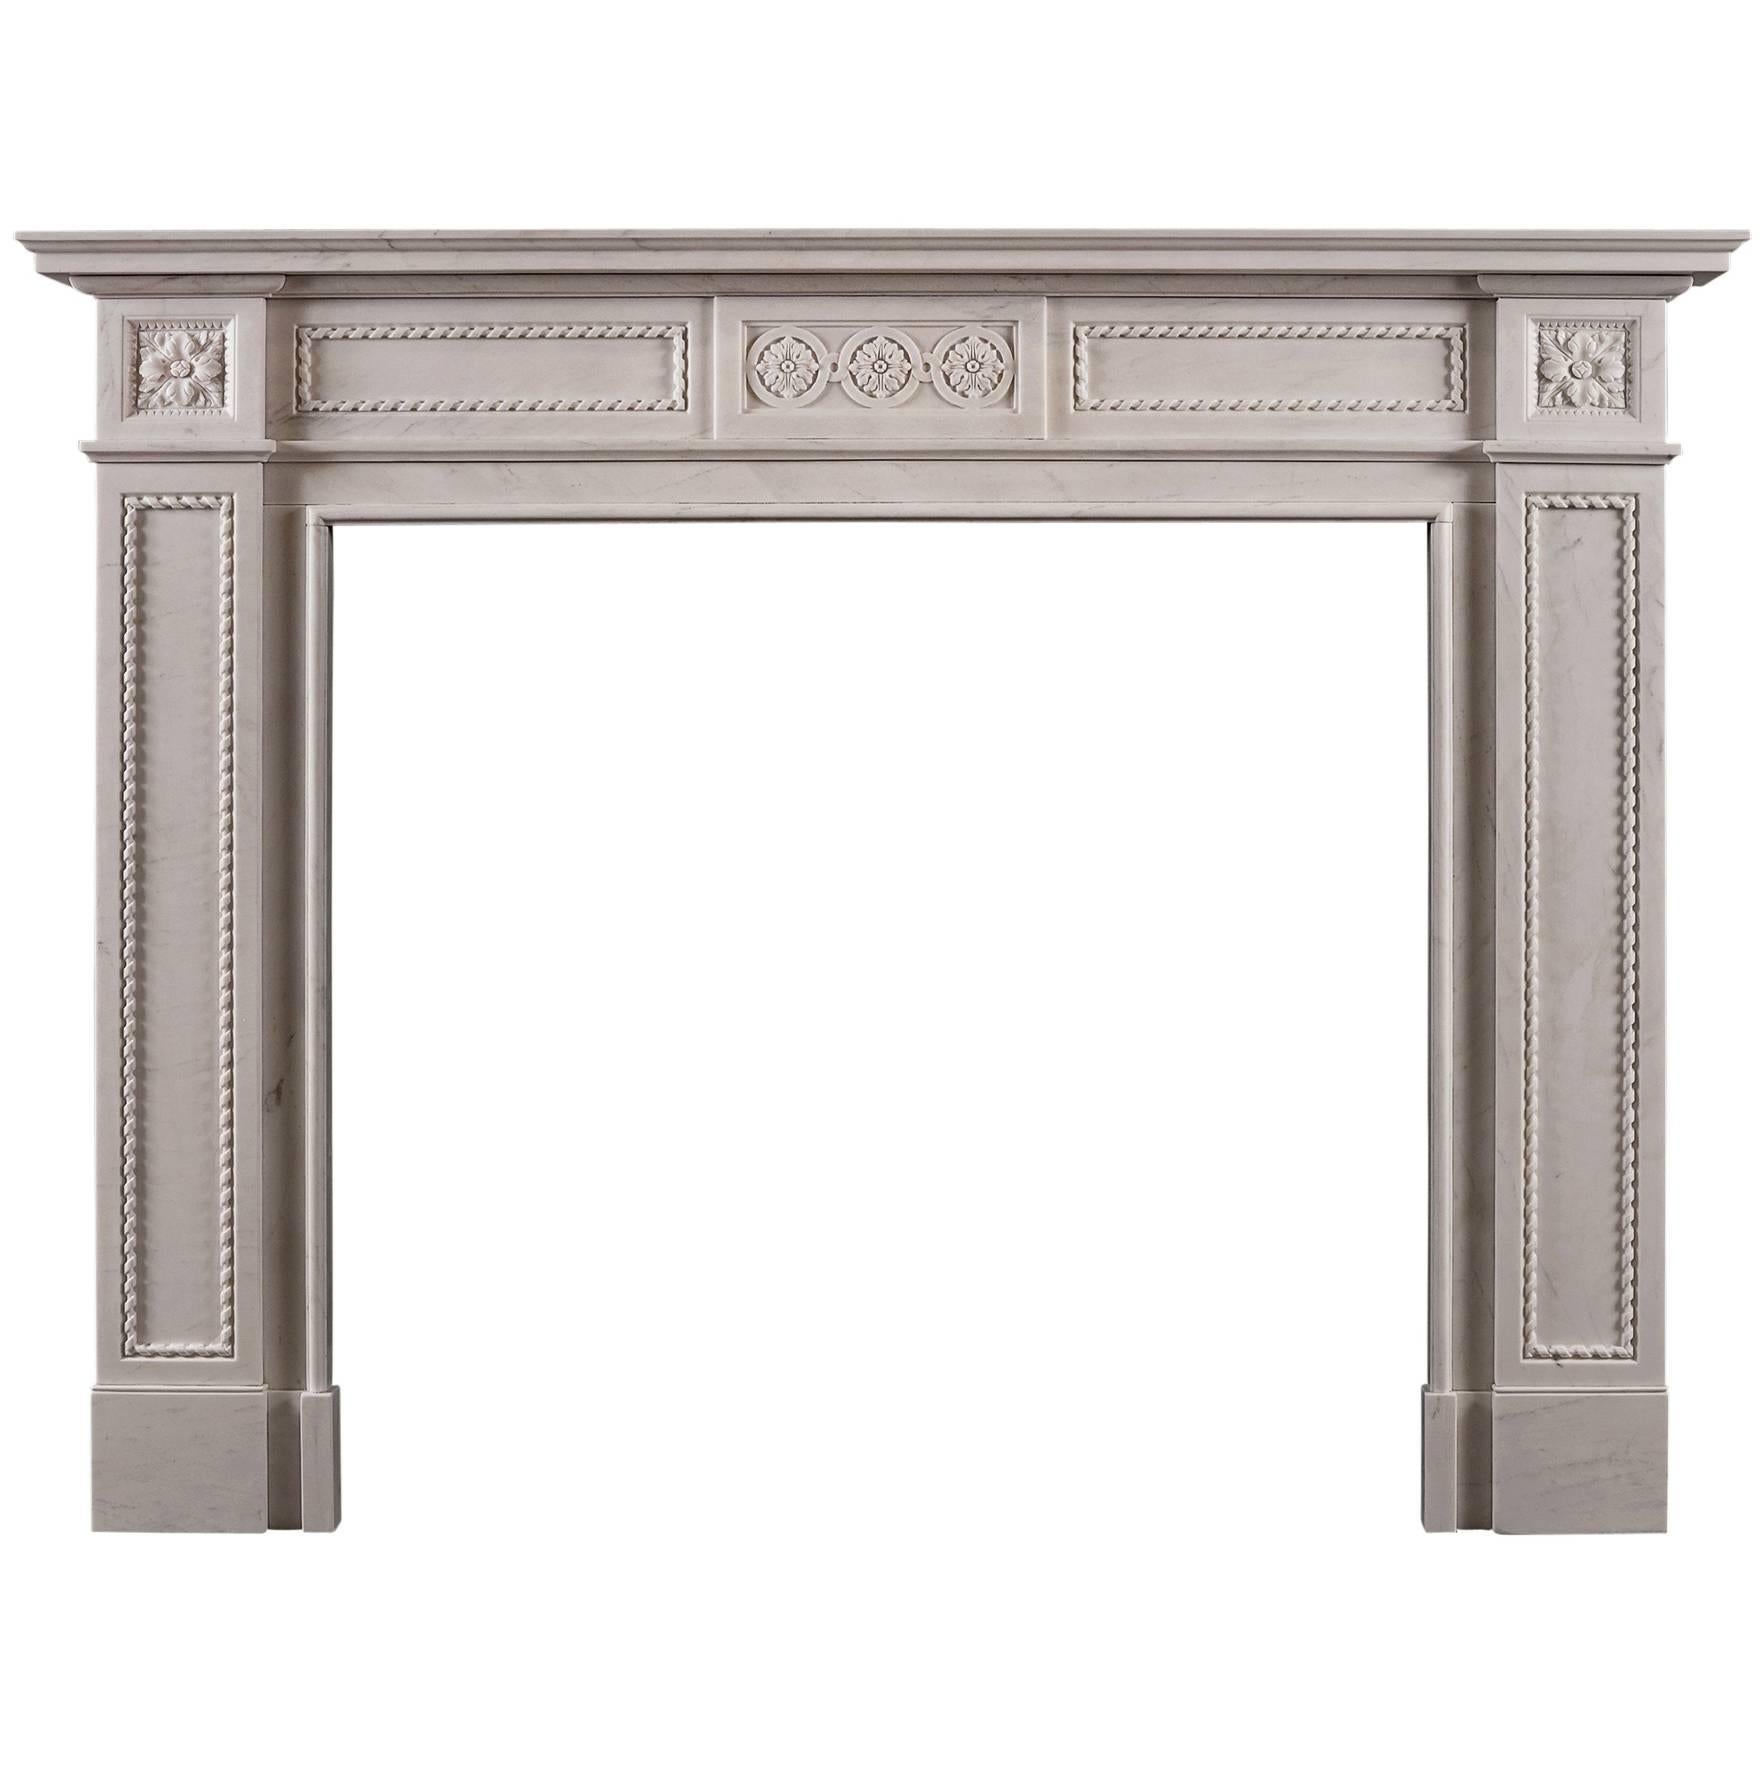 Attractive English Fireplace in the Regency Style